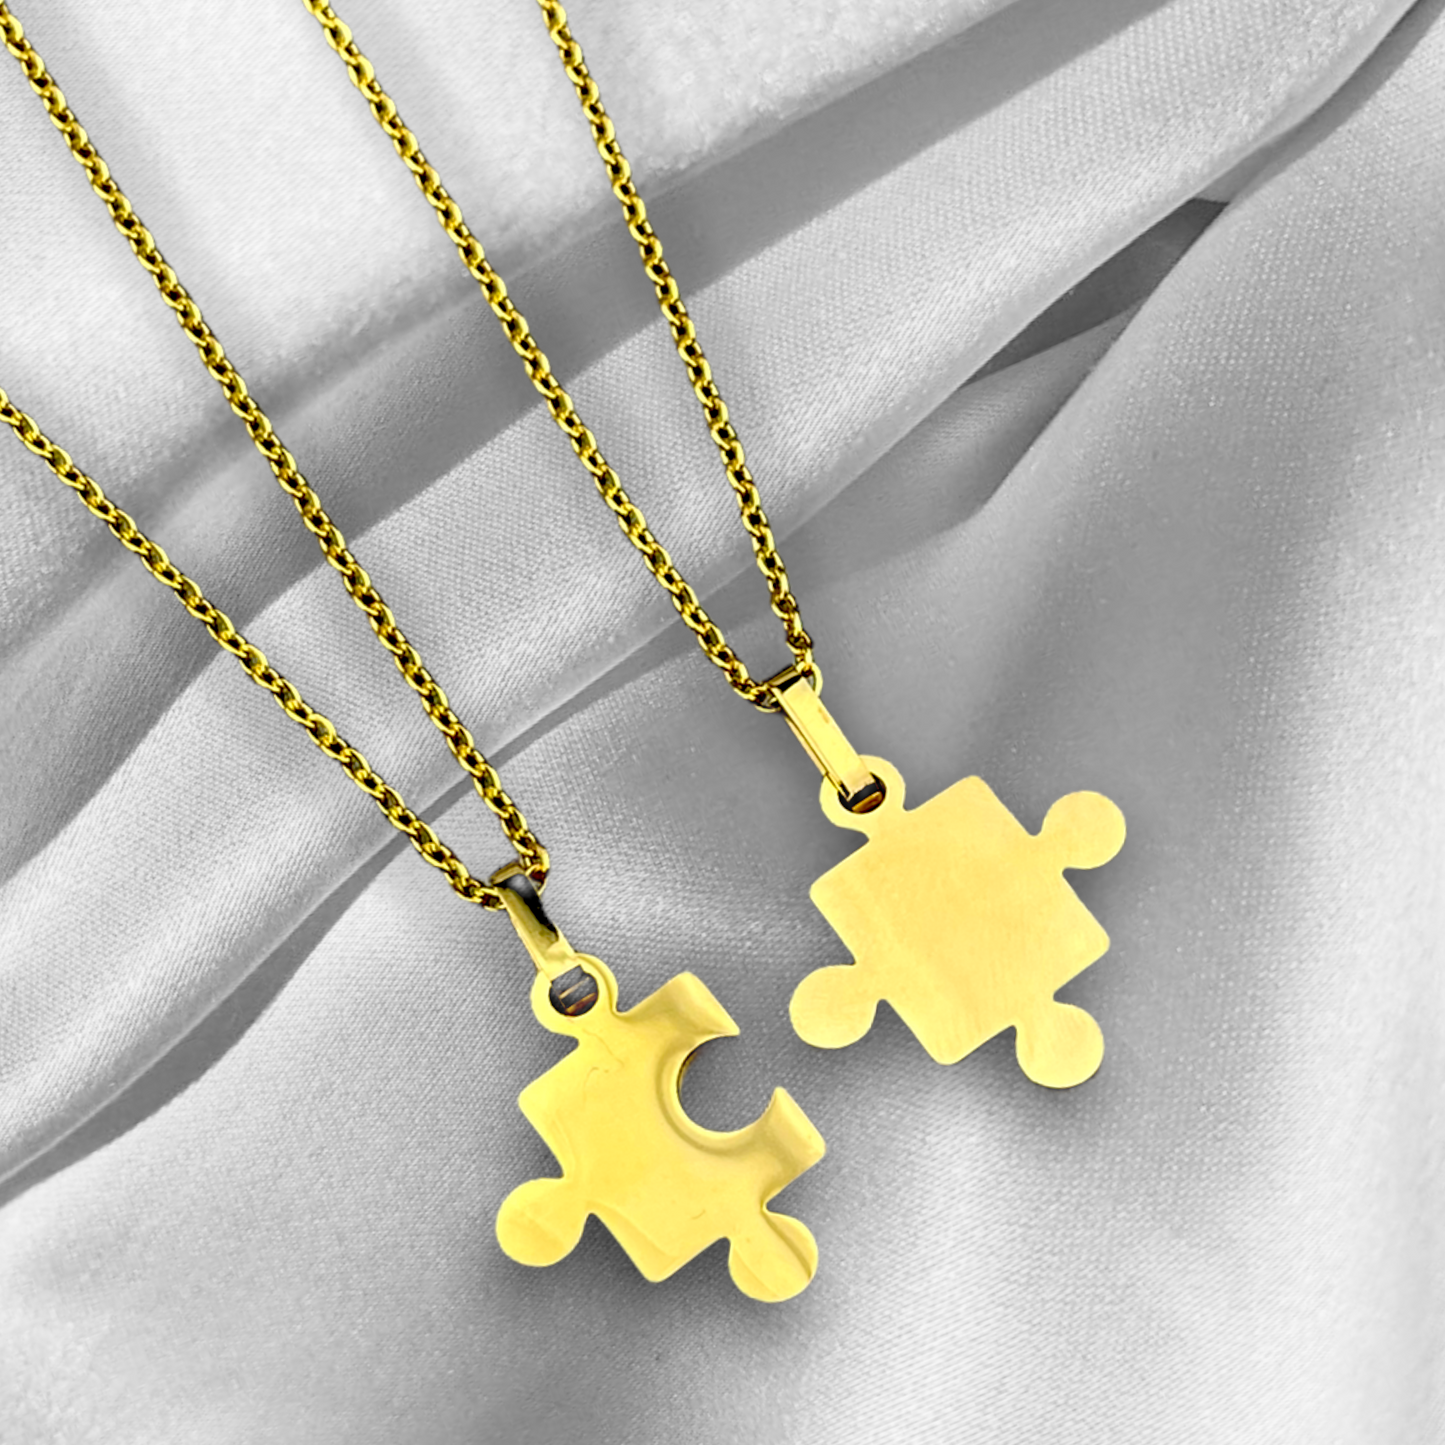 Gold Plated Puzzle Chain in Double Pack - Friendship Chains - Gift Idea for Best Girlfriend - VIK-128